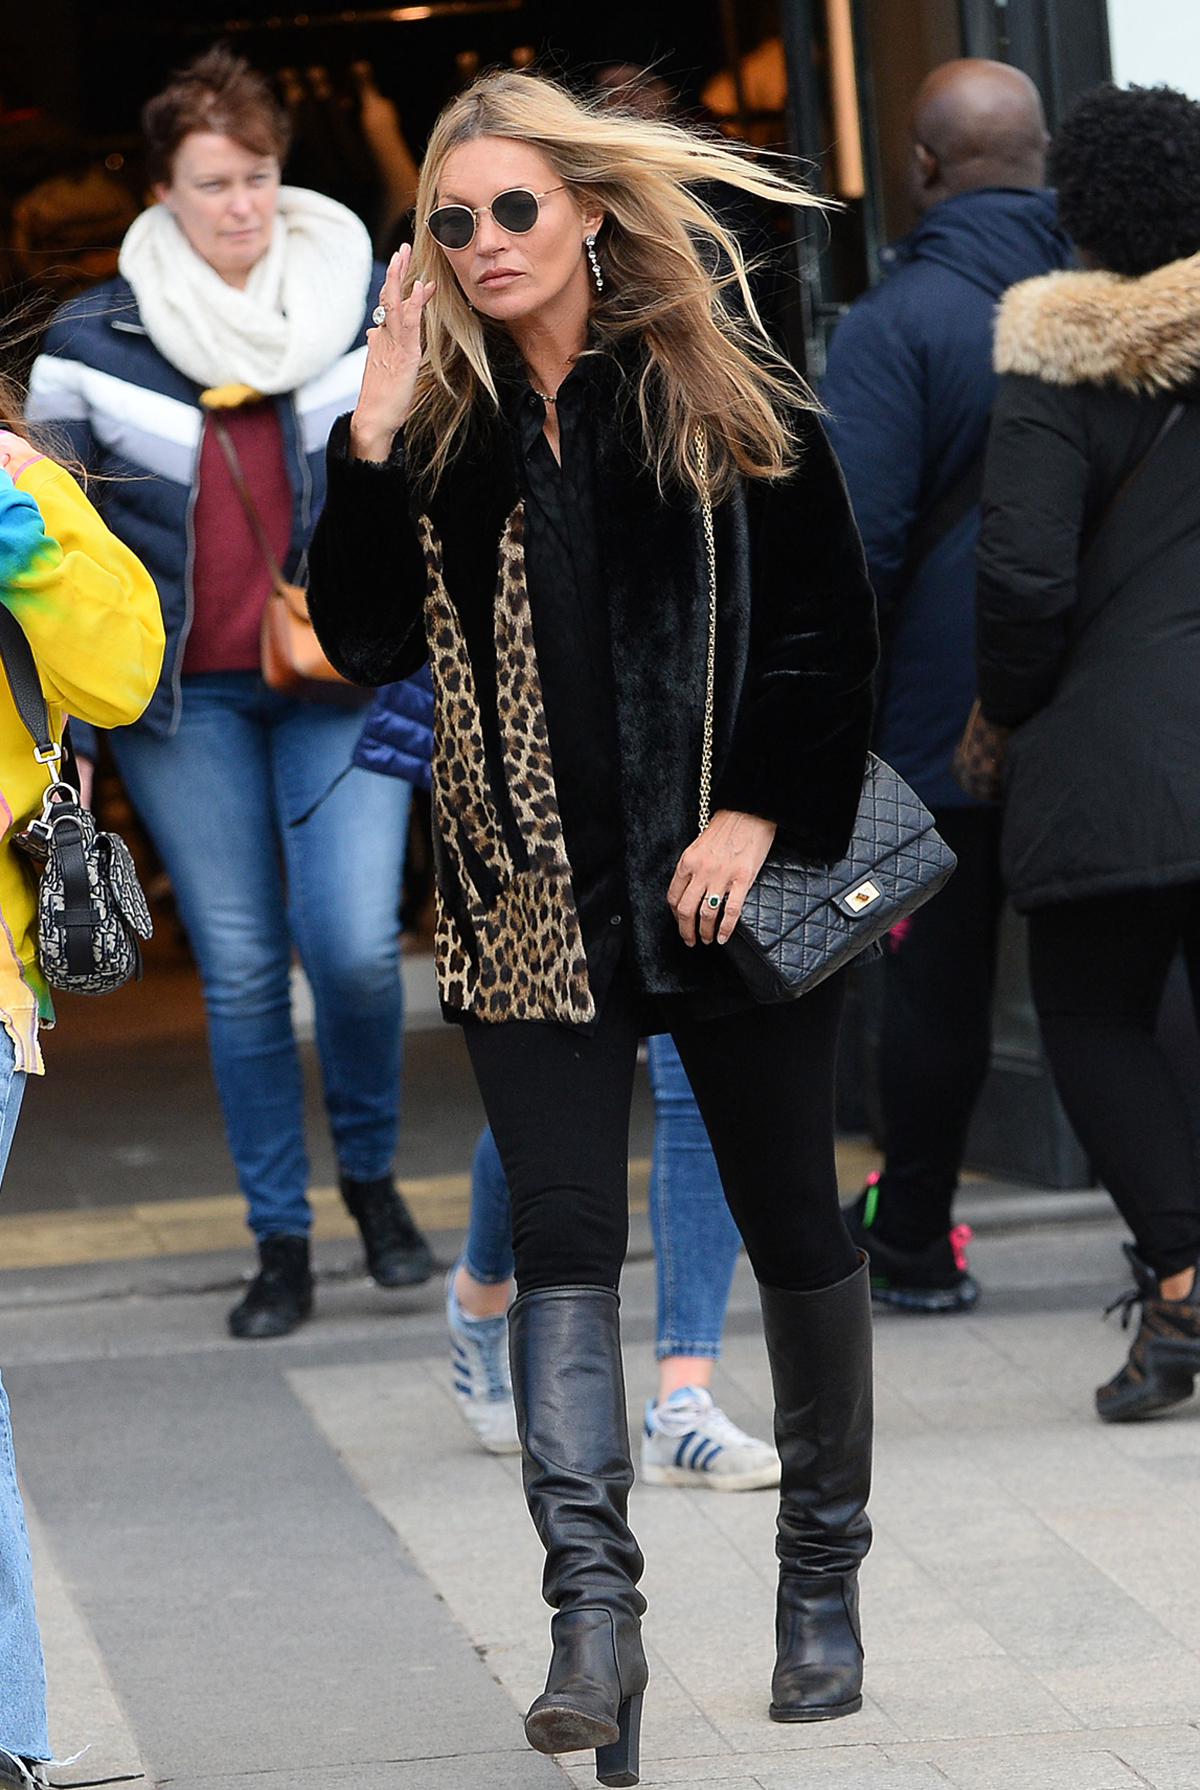 Kate Moss skinny jeans and boots and leopard print: